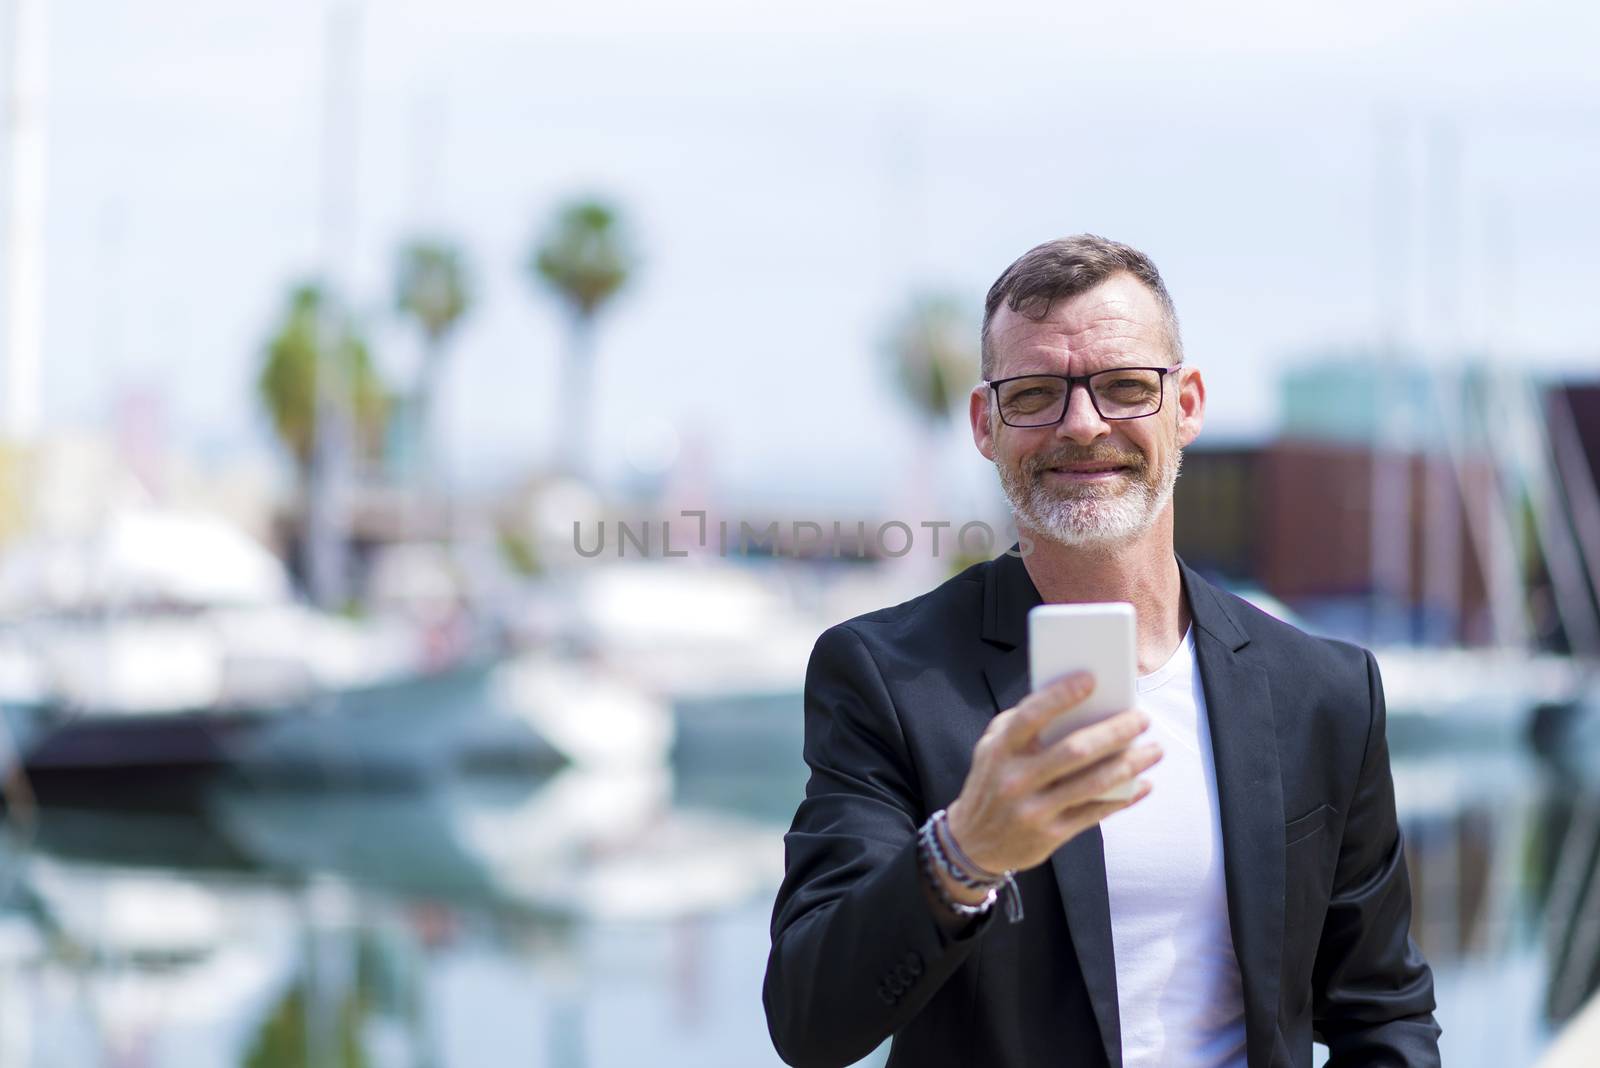 Mature businessman using cell phone while standing outdoors against harbor by raferto1973